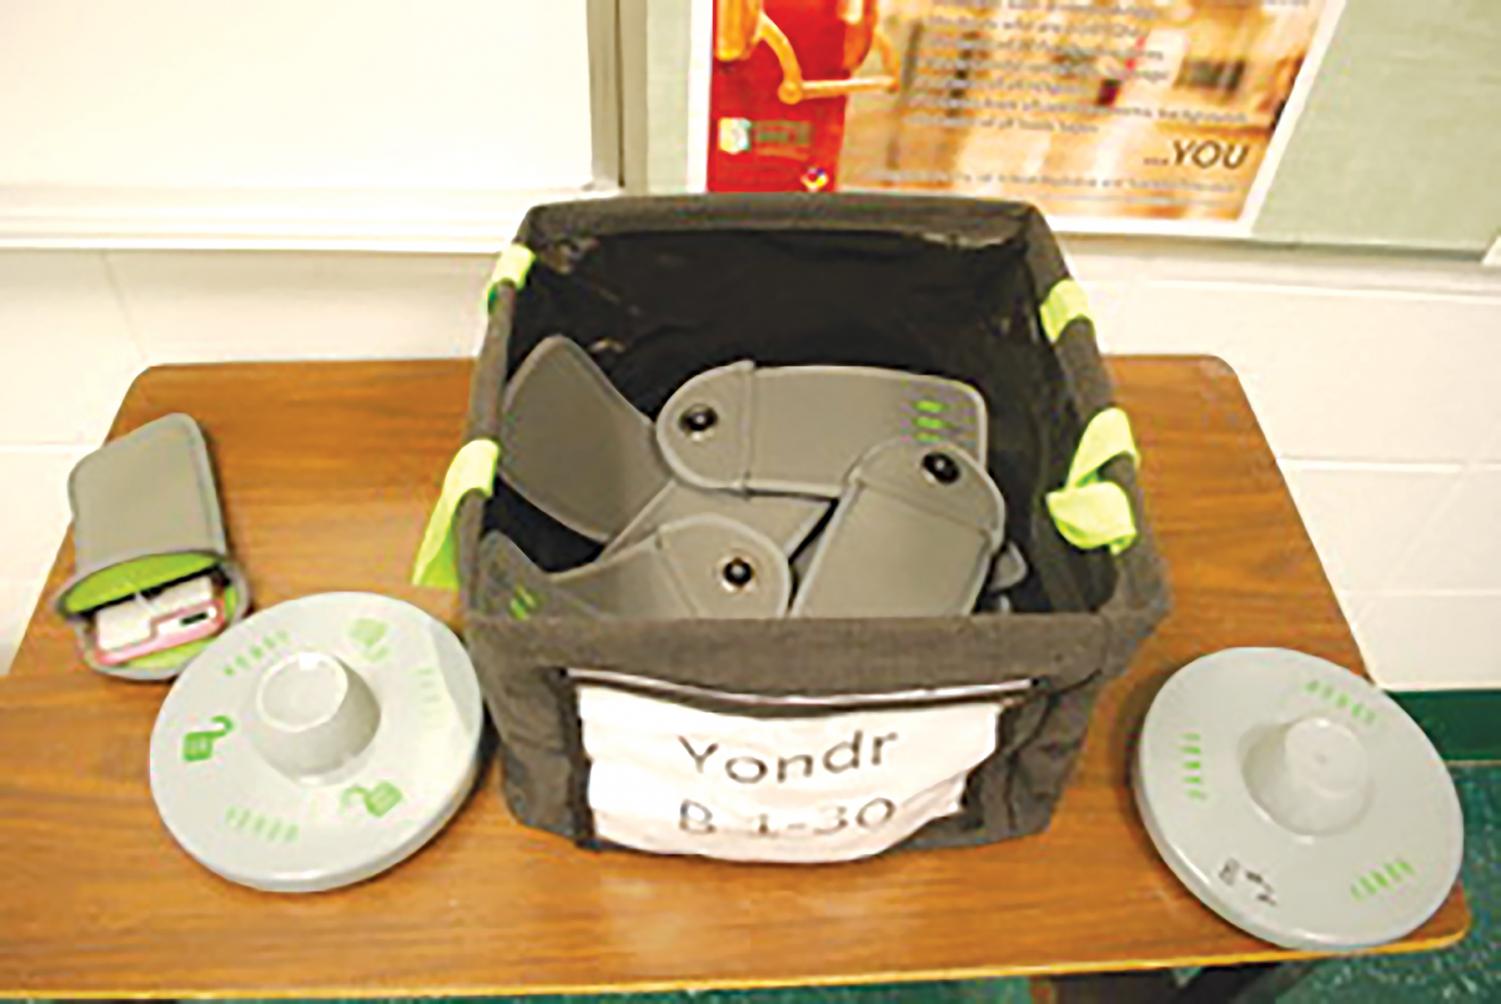 Plainfield NJ school now uses Yondr pouch locks for cell phones